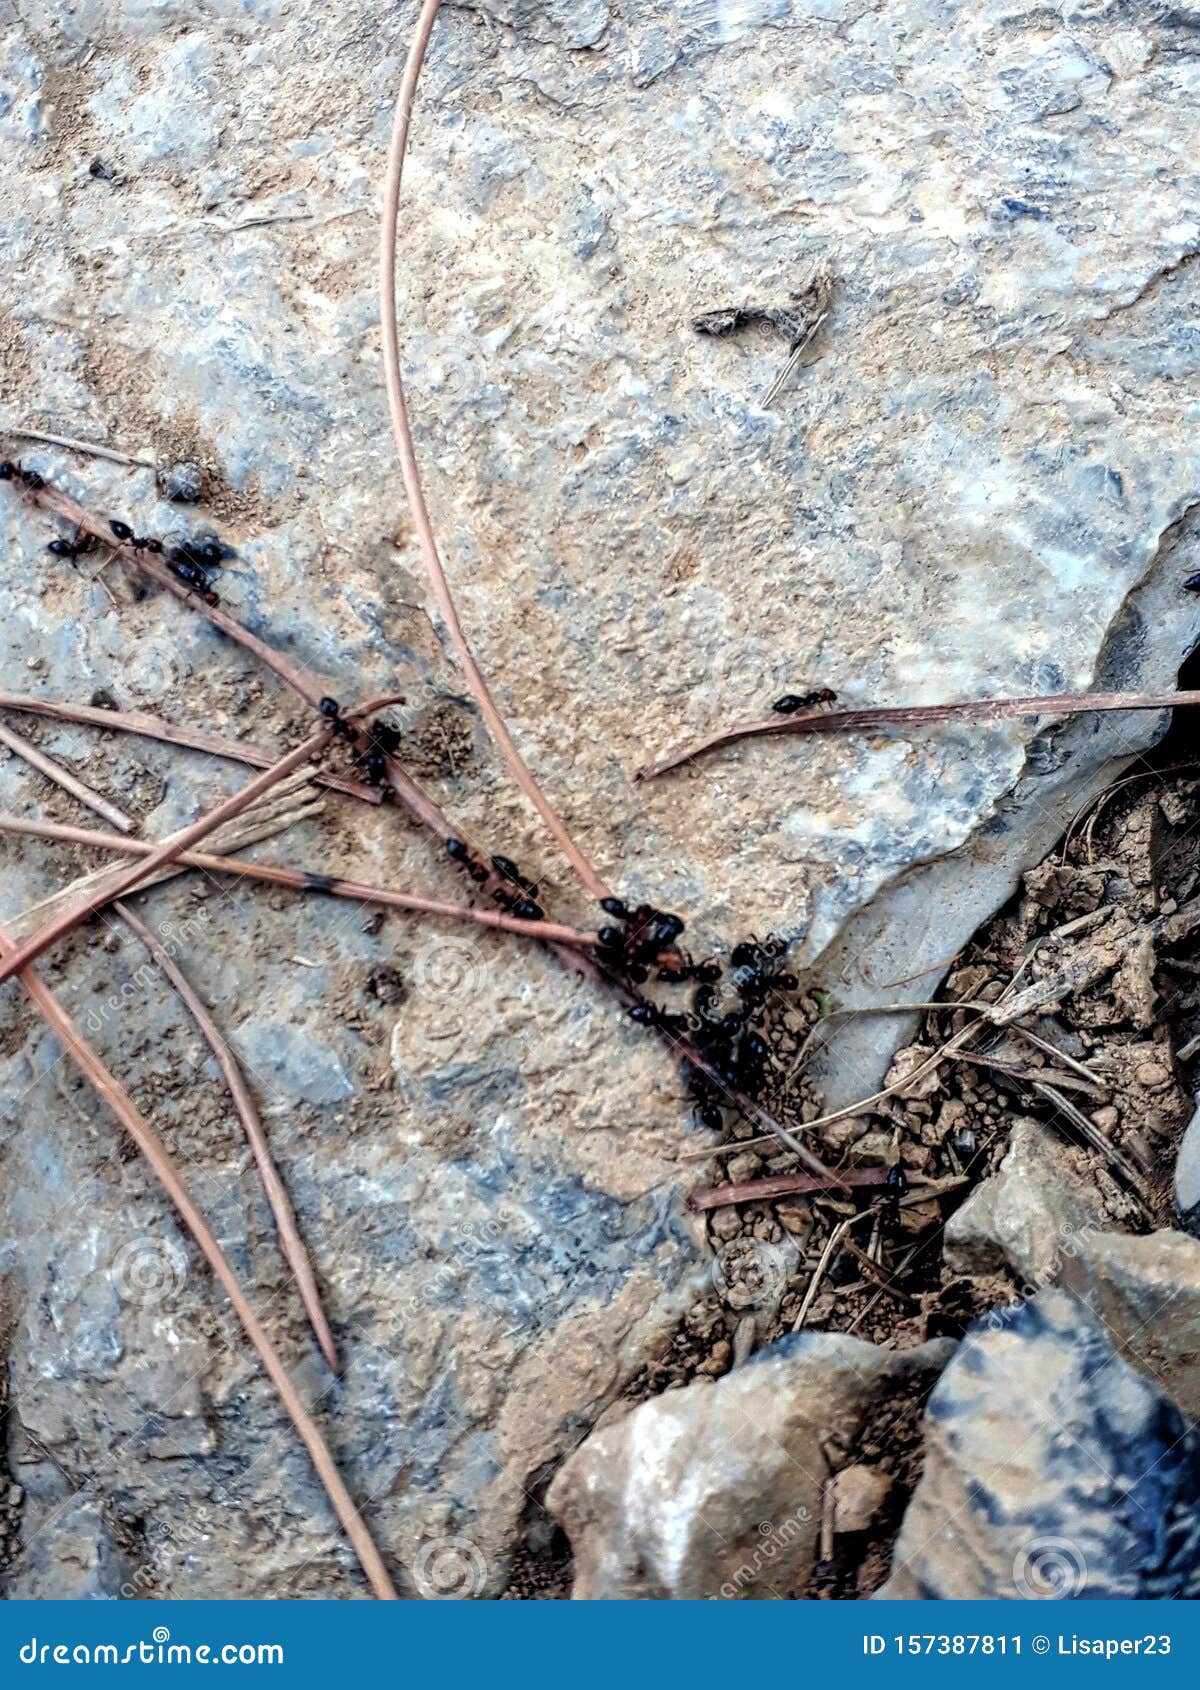 ants nest in the rock